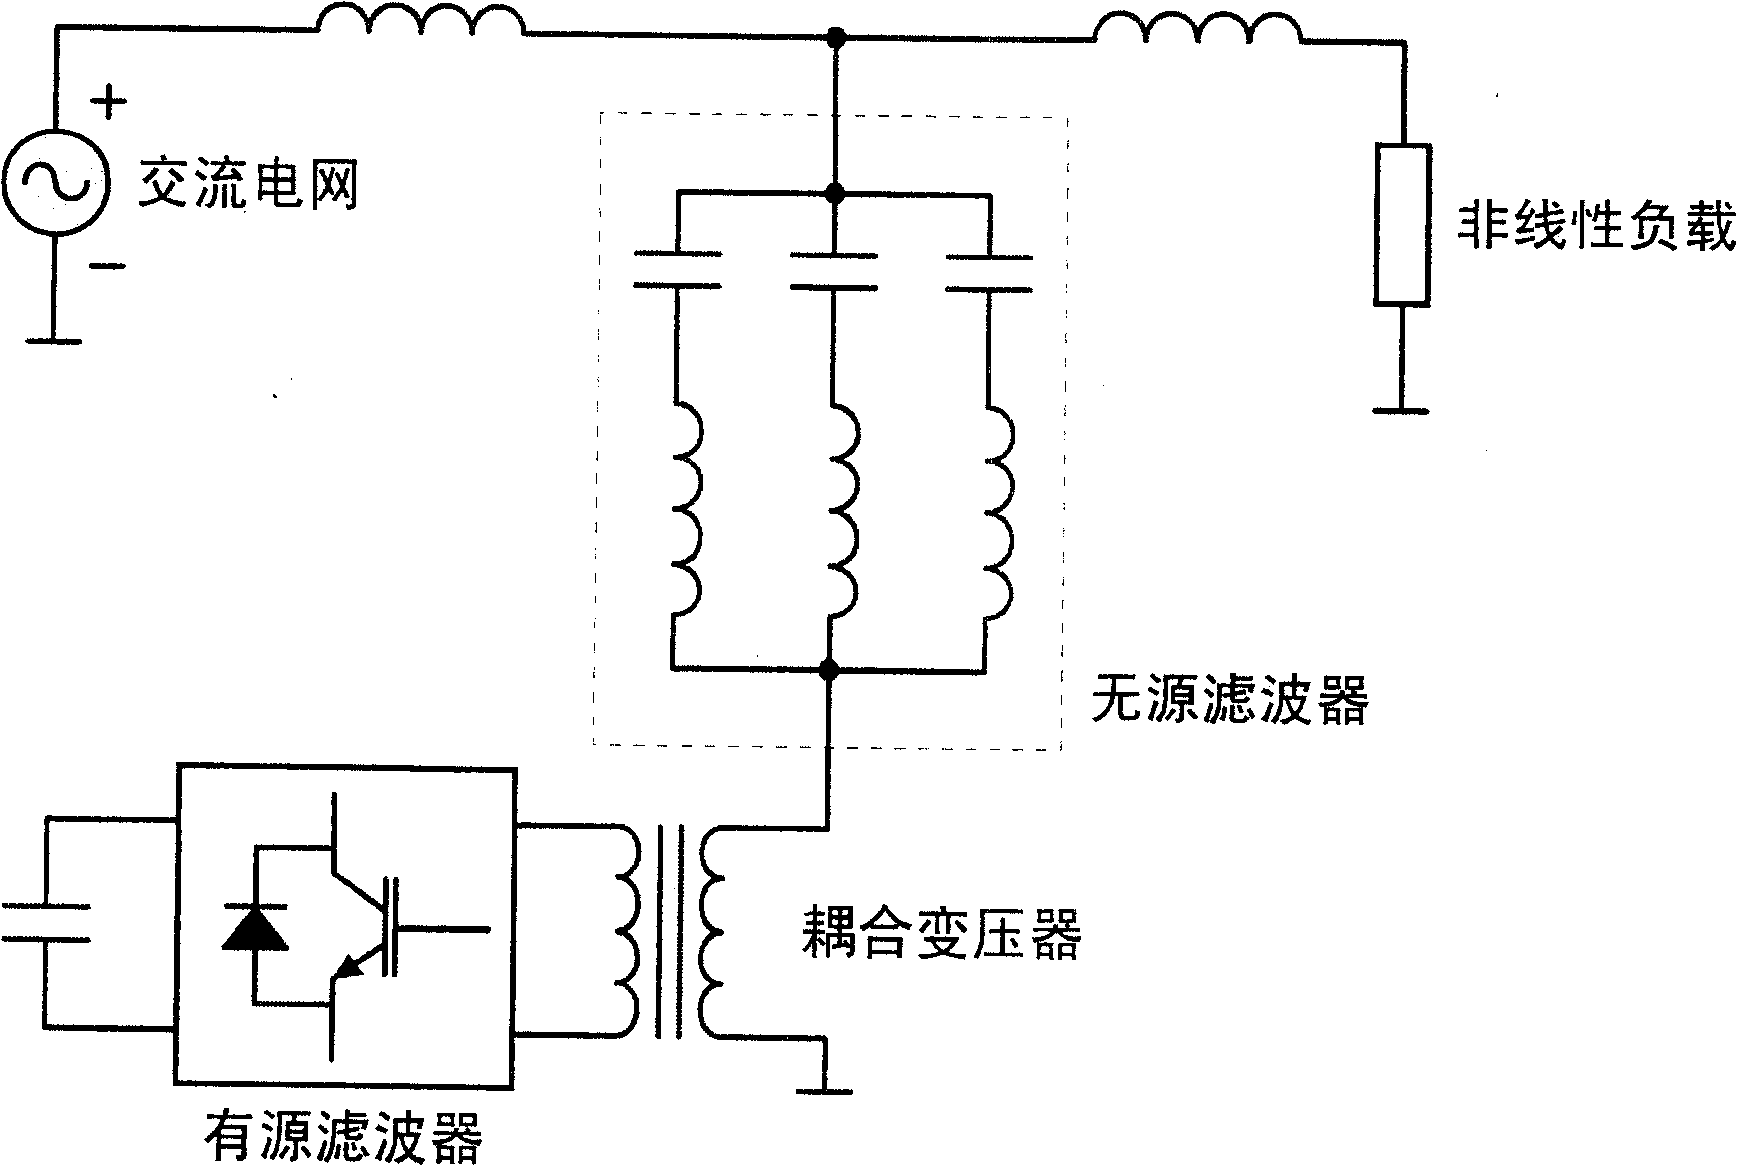 Hybrid active power filter and its control method